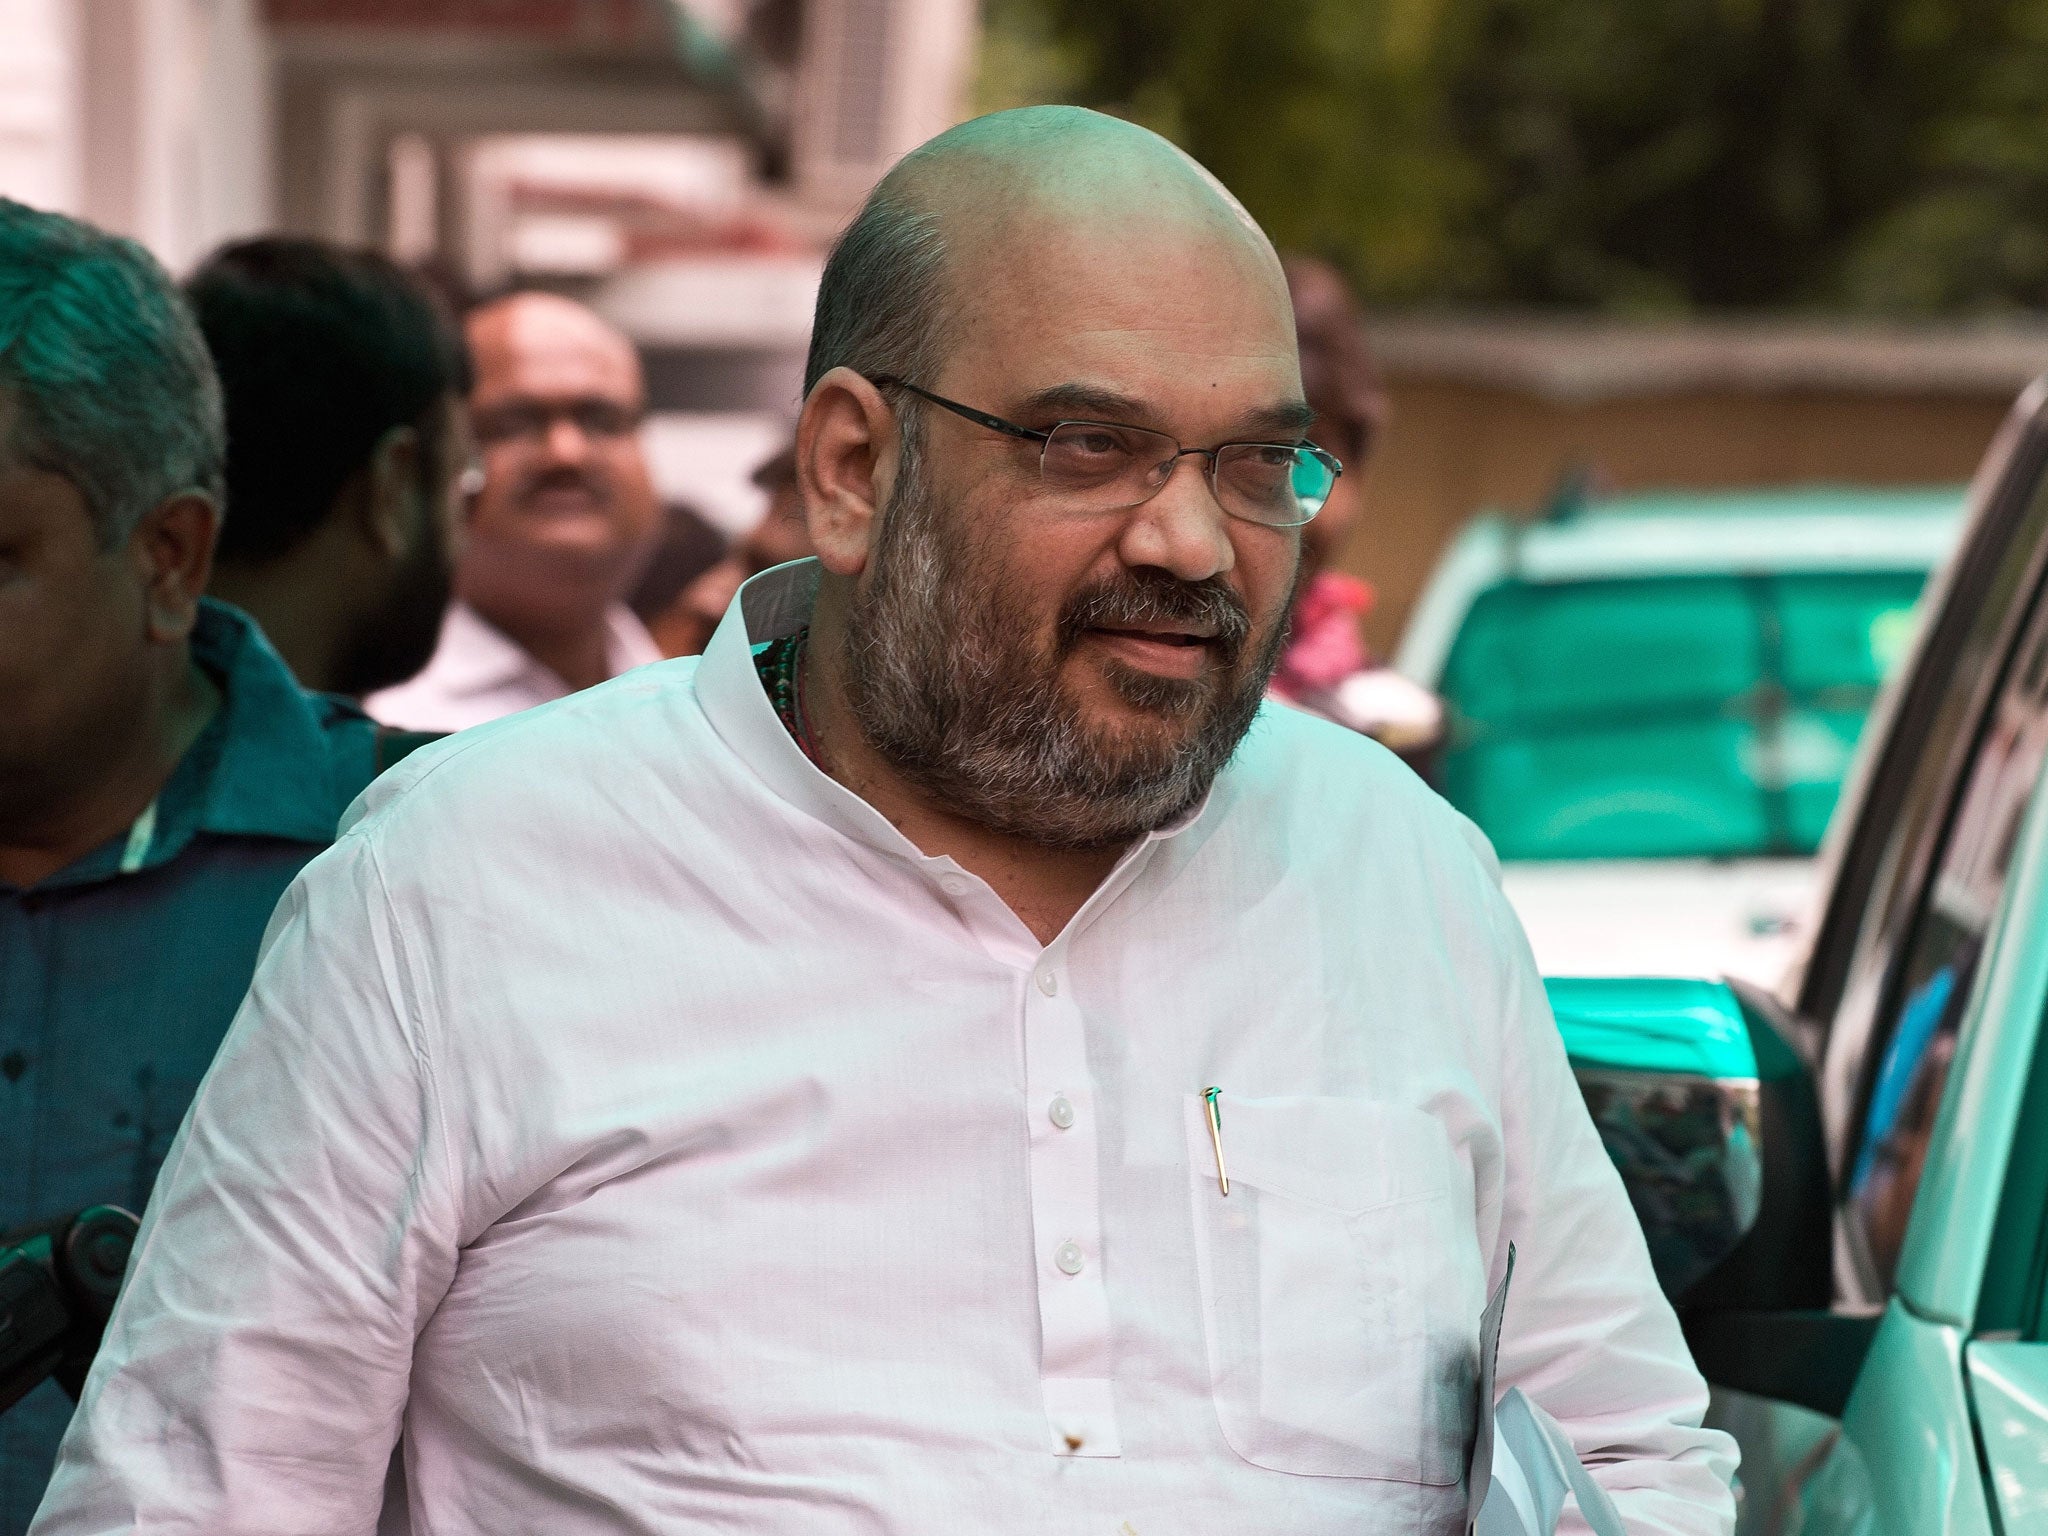 India’s Election Commission ordered that charges should be filed against Amit Shah for stoking communal tensions